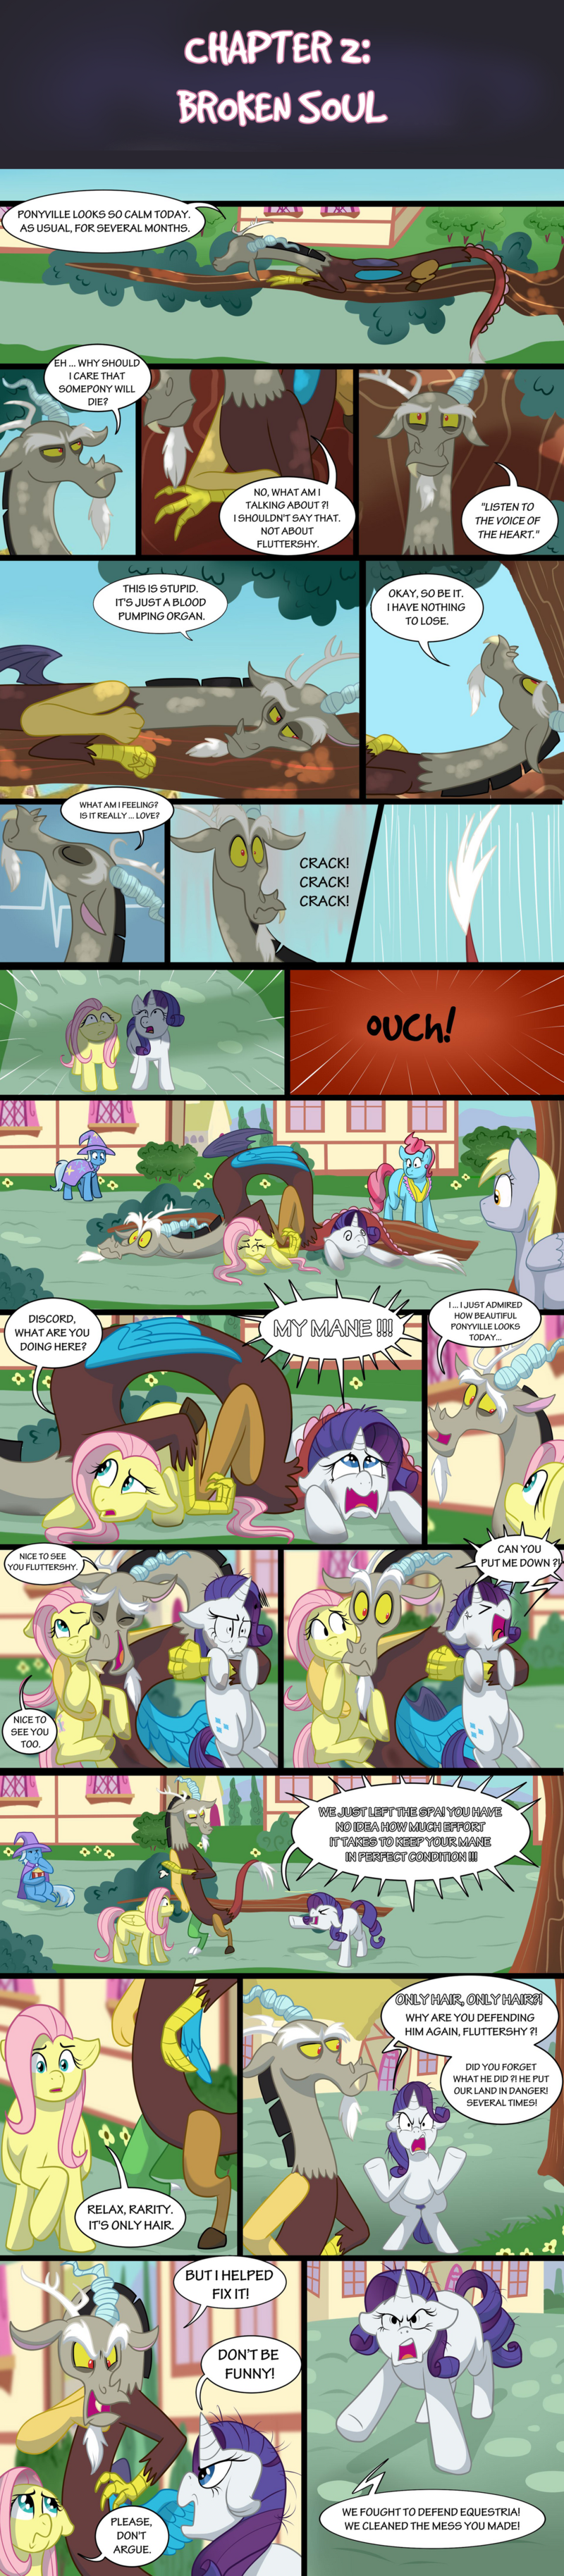 Page 27-29: Rarity is mad at Discord